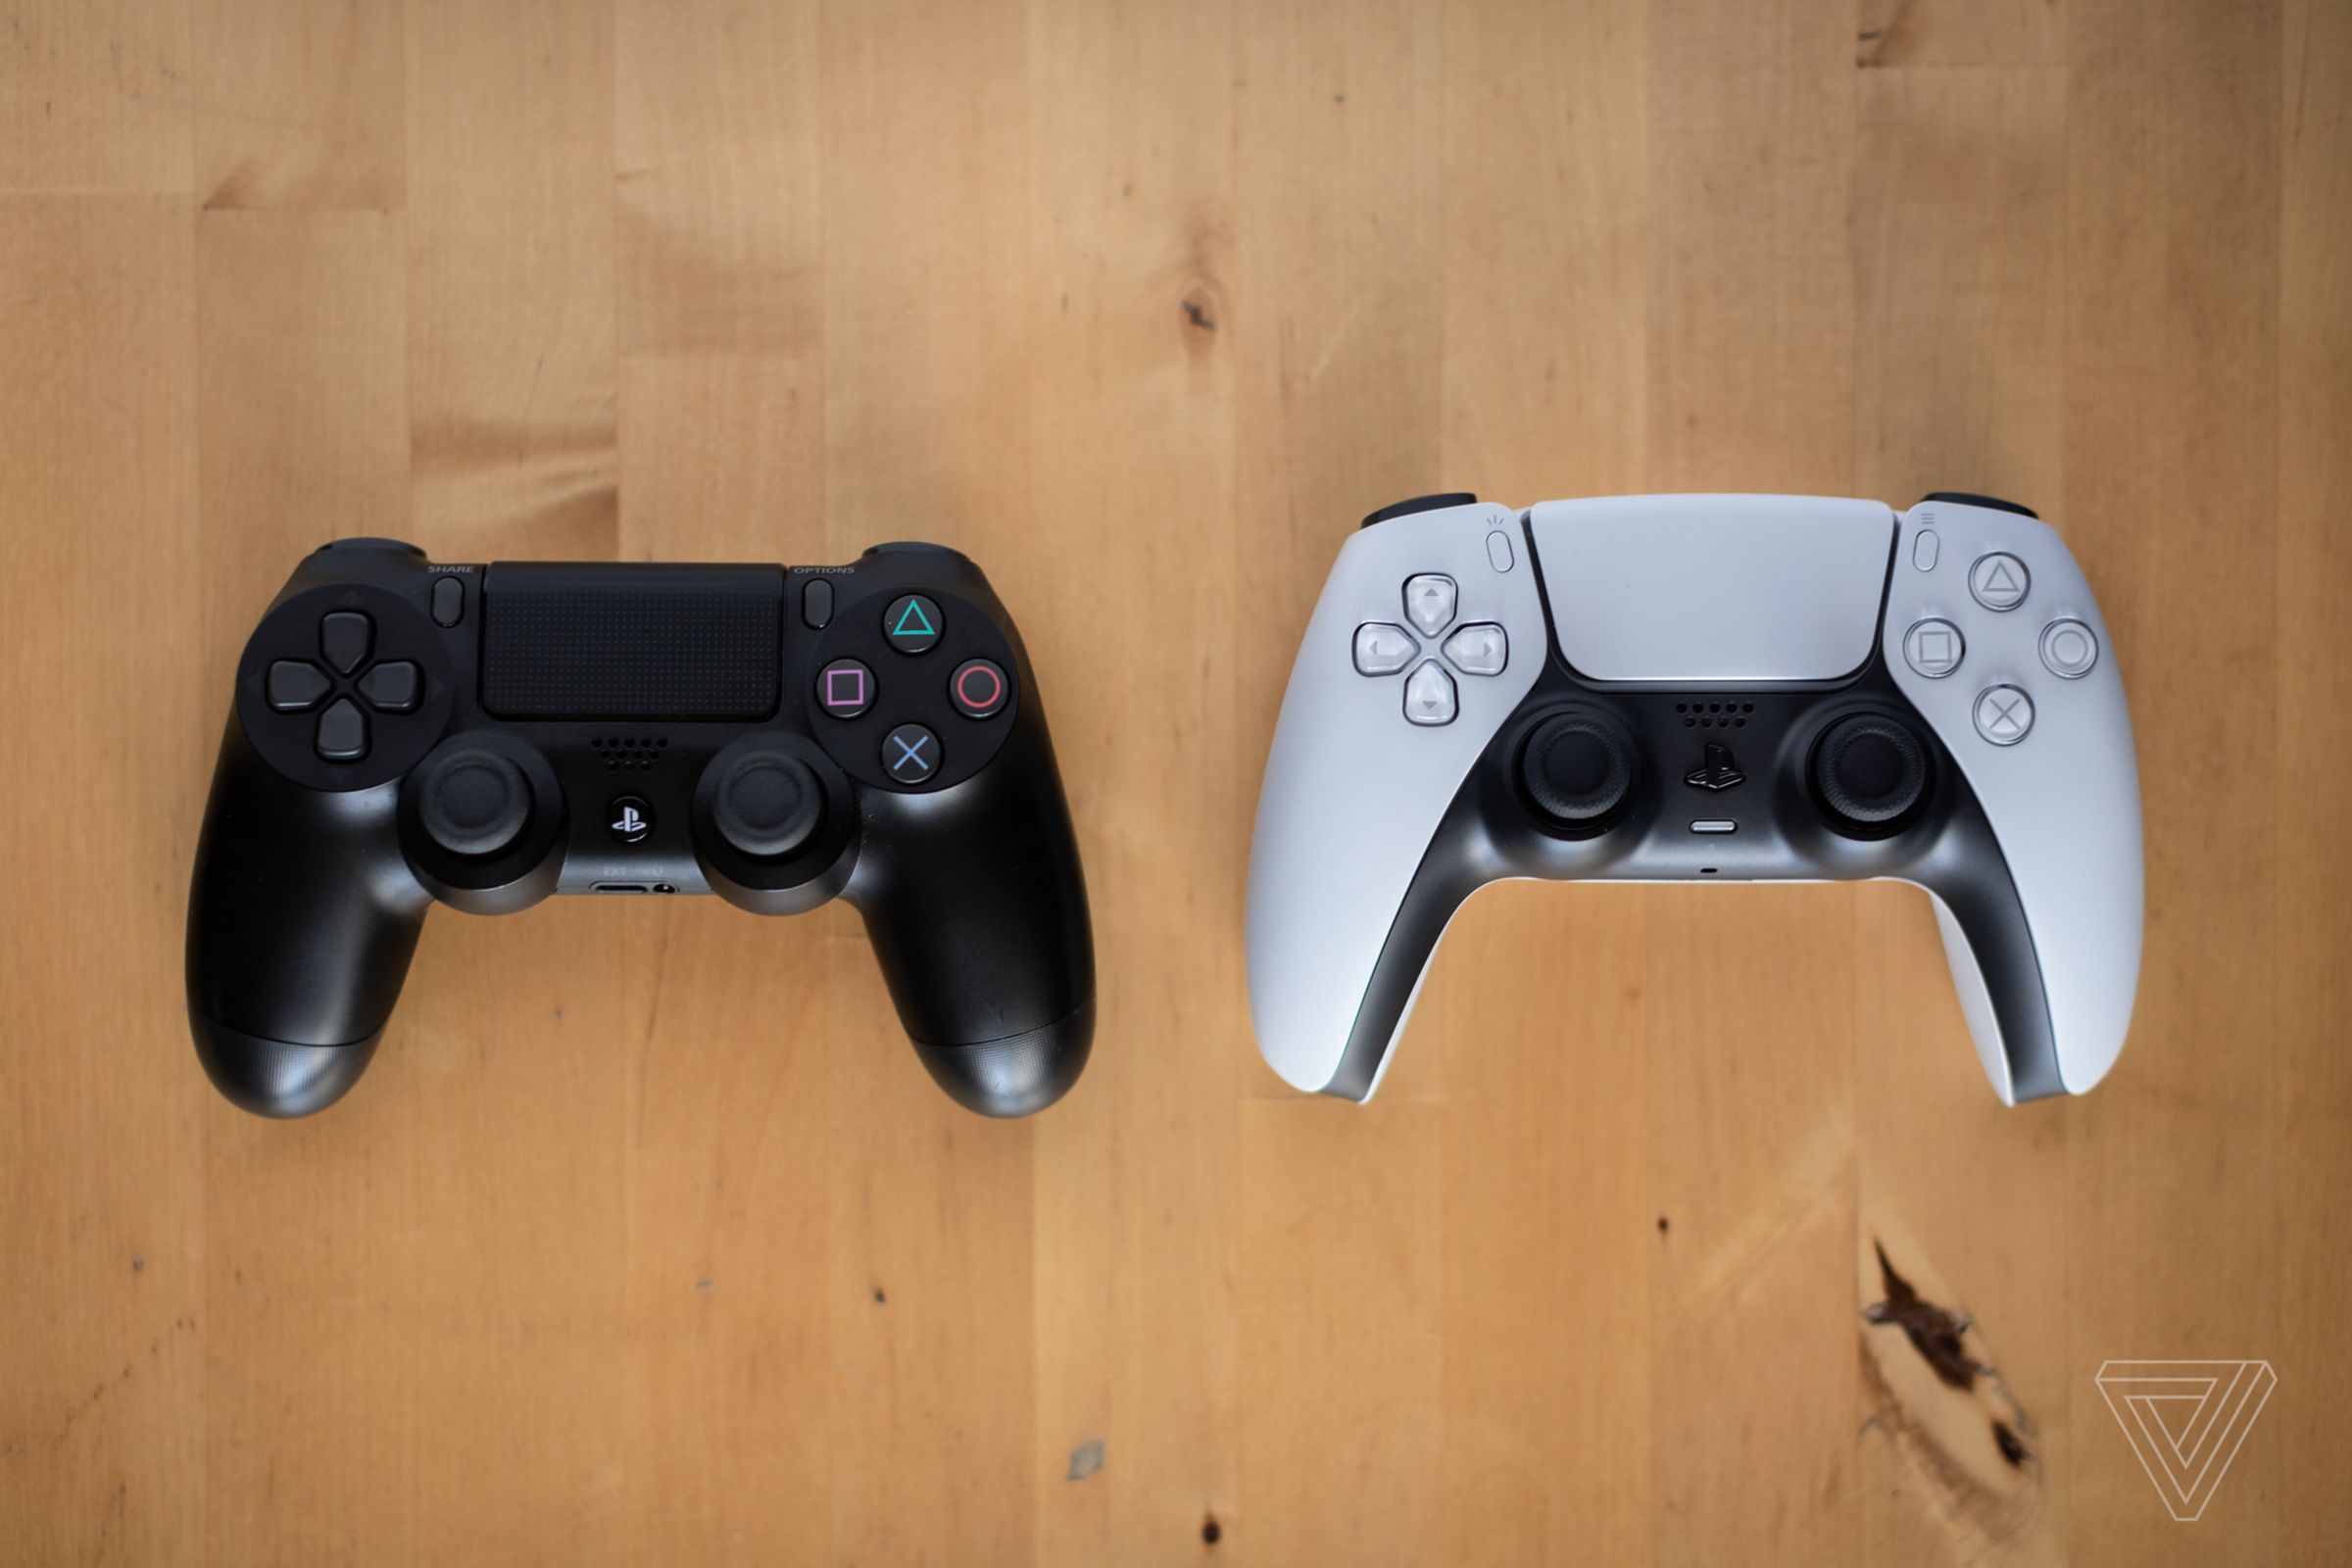 Each PS5 comes with one DualSense controller. You can use the DualShock 4 controller, but it will only work if you play PS4 games on the next-gen console. 